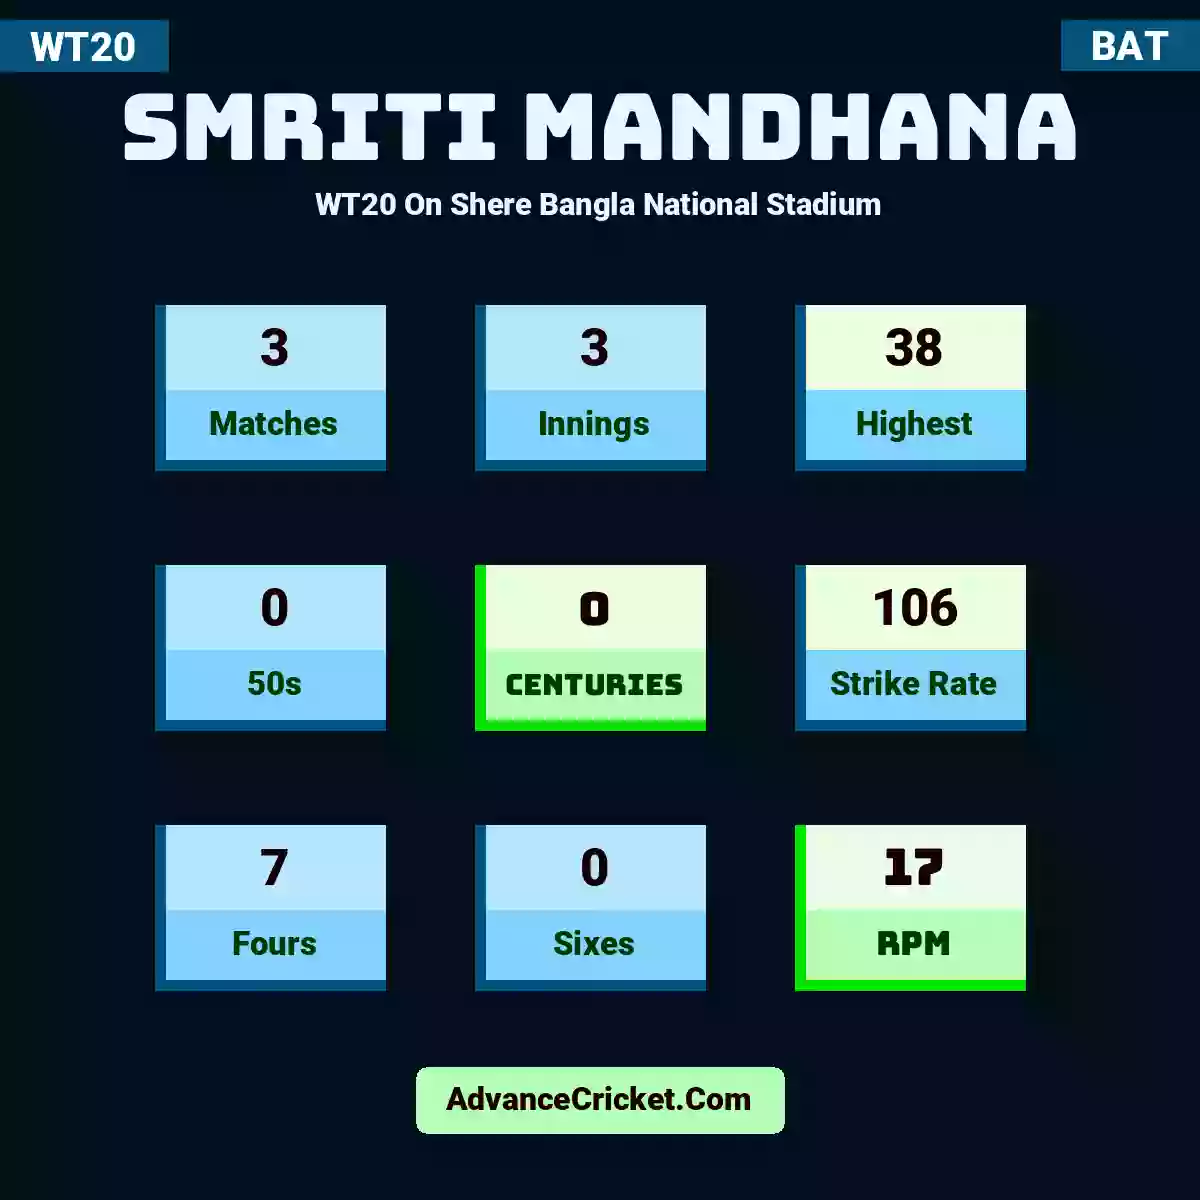 Smriti Mandhana WT20  On Shere Bangla National Stadium, Smriti Mandhana played 3 matches, scored 38 runs as highest, 0 half-centuries, and 0 centuries, with a strike rate of 106. S.Mandhana hit 7 fours and 0 sixes, with an RPM of 17.